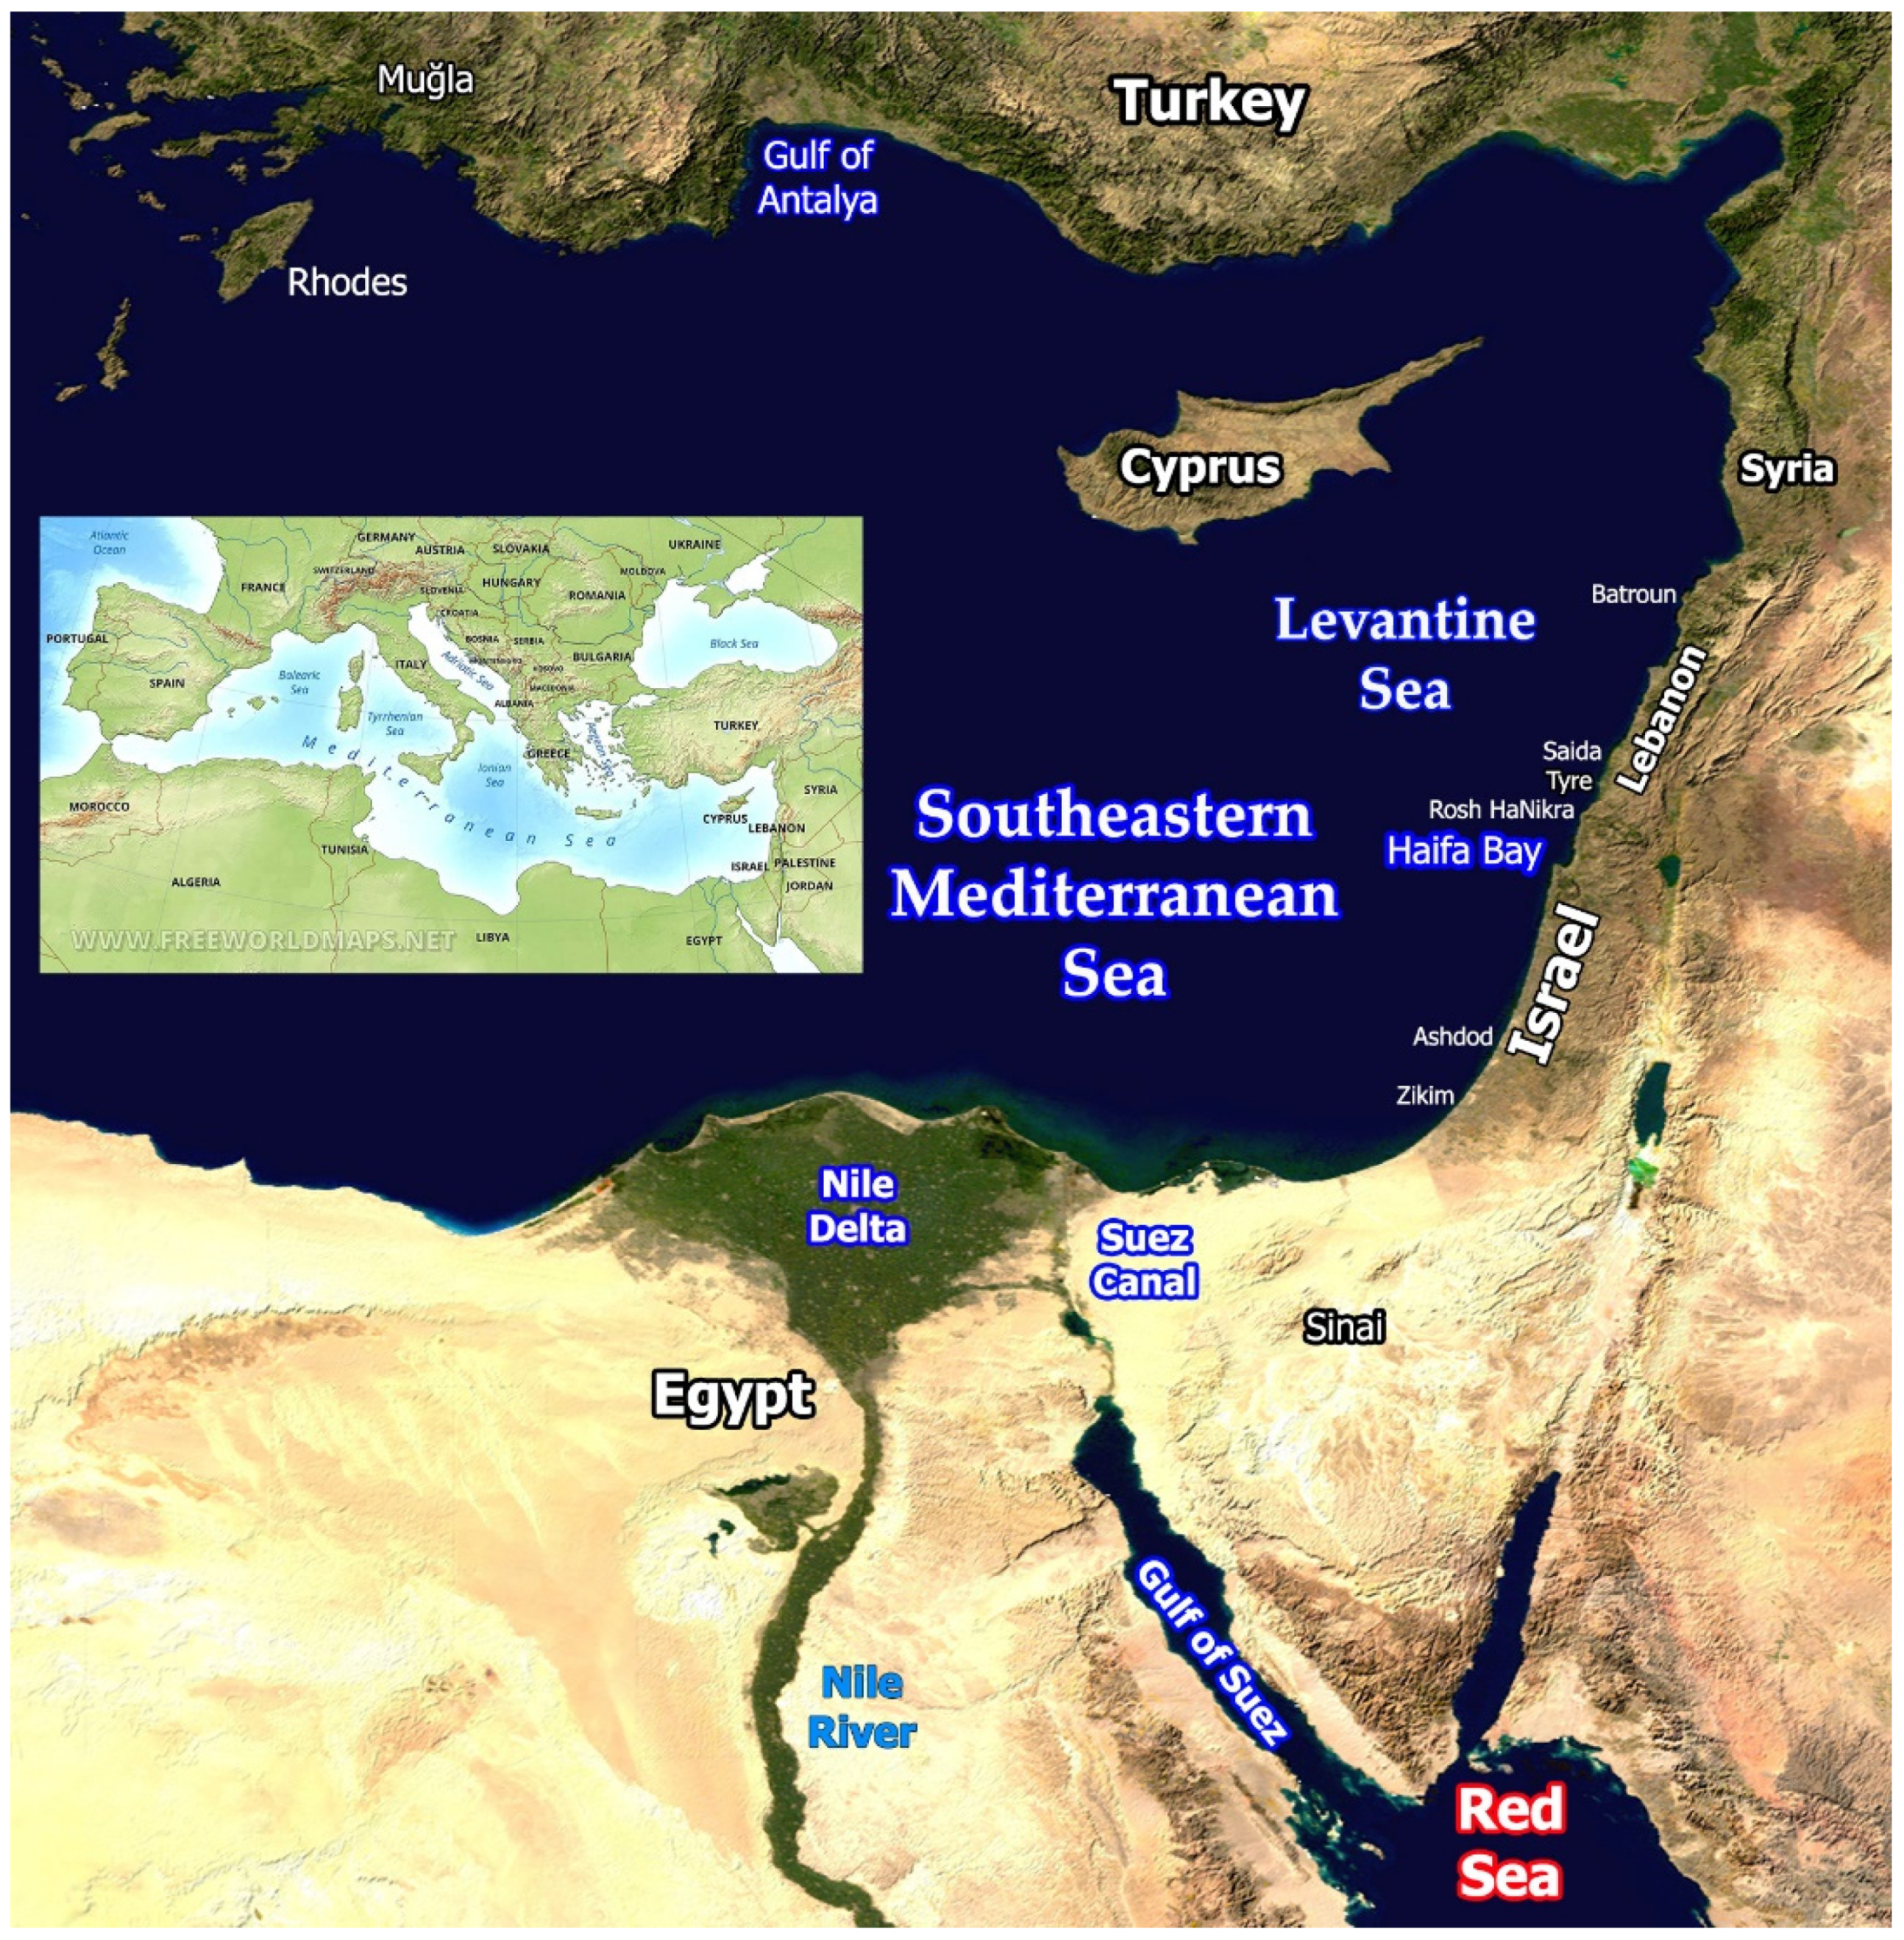 From Coast to Coast in the Eastern Mediterranean